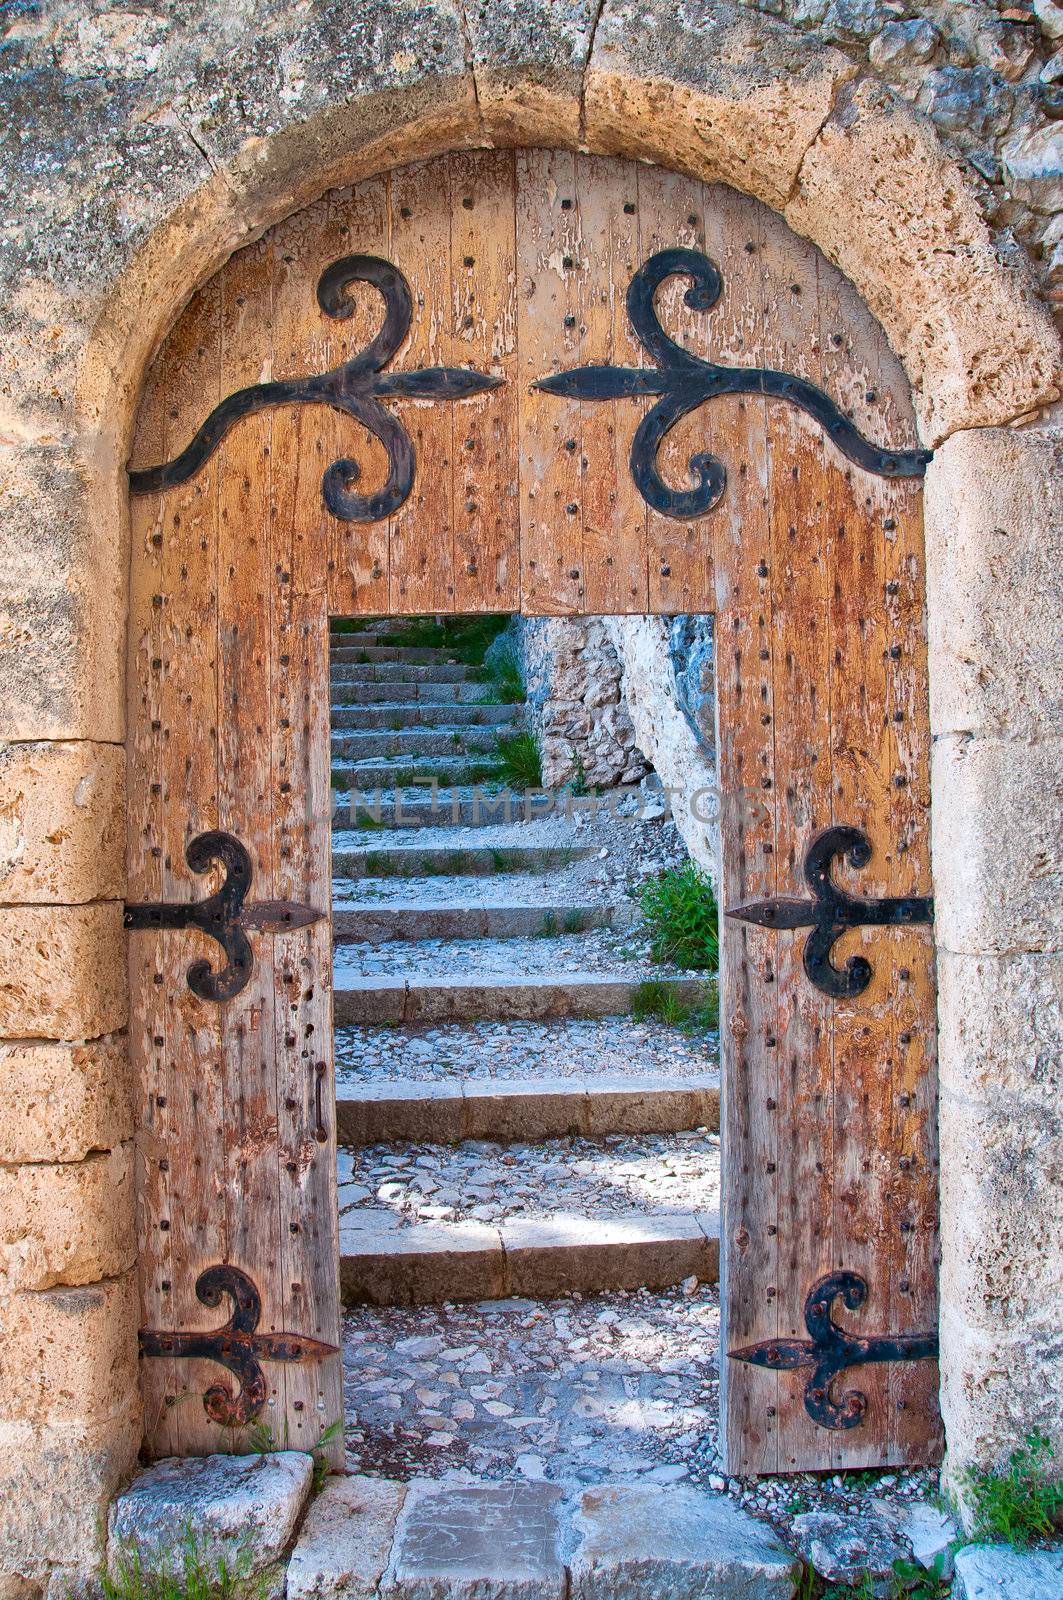 Old open wooden door with stone stairs in the background